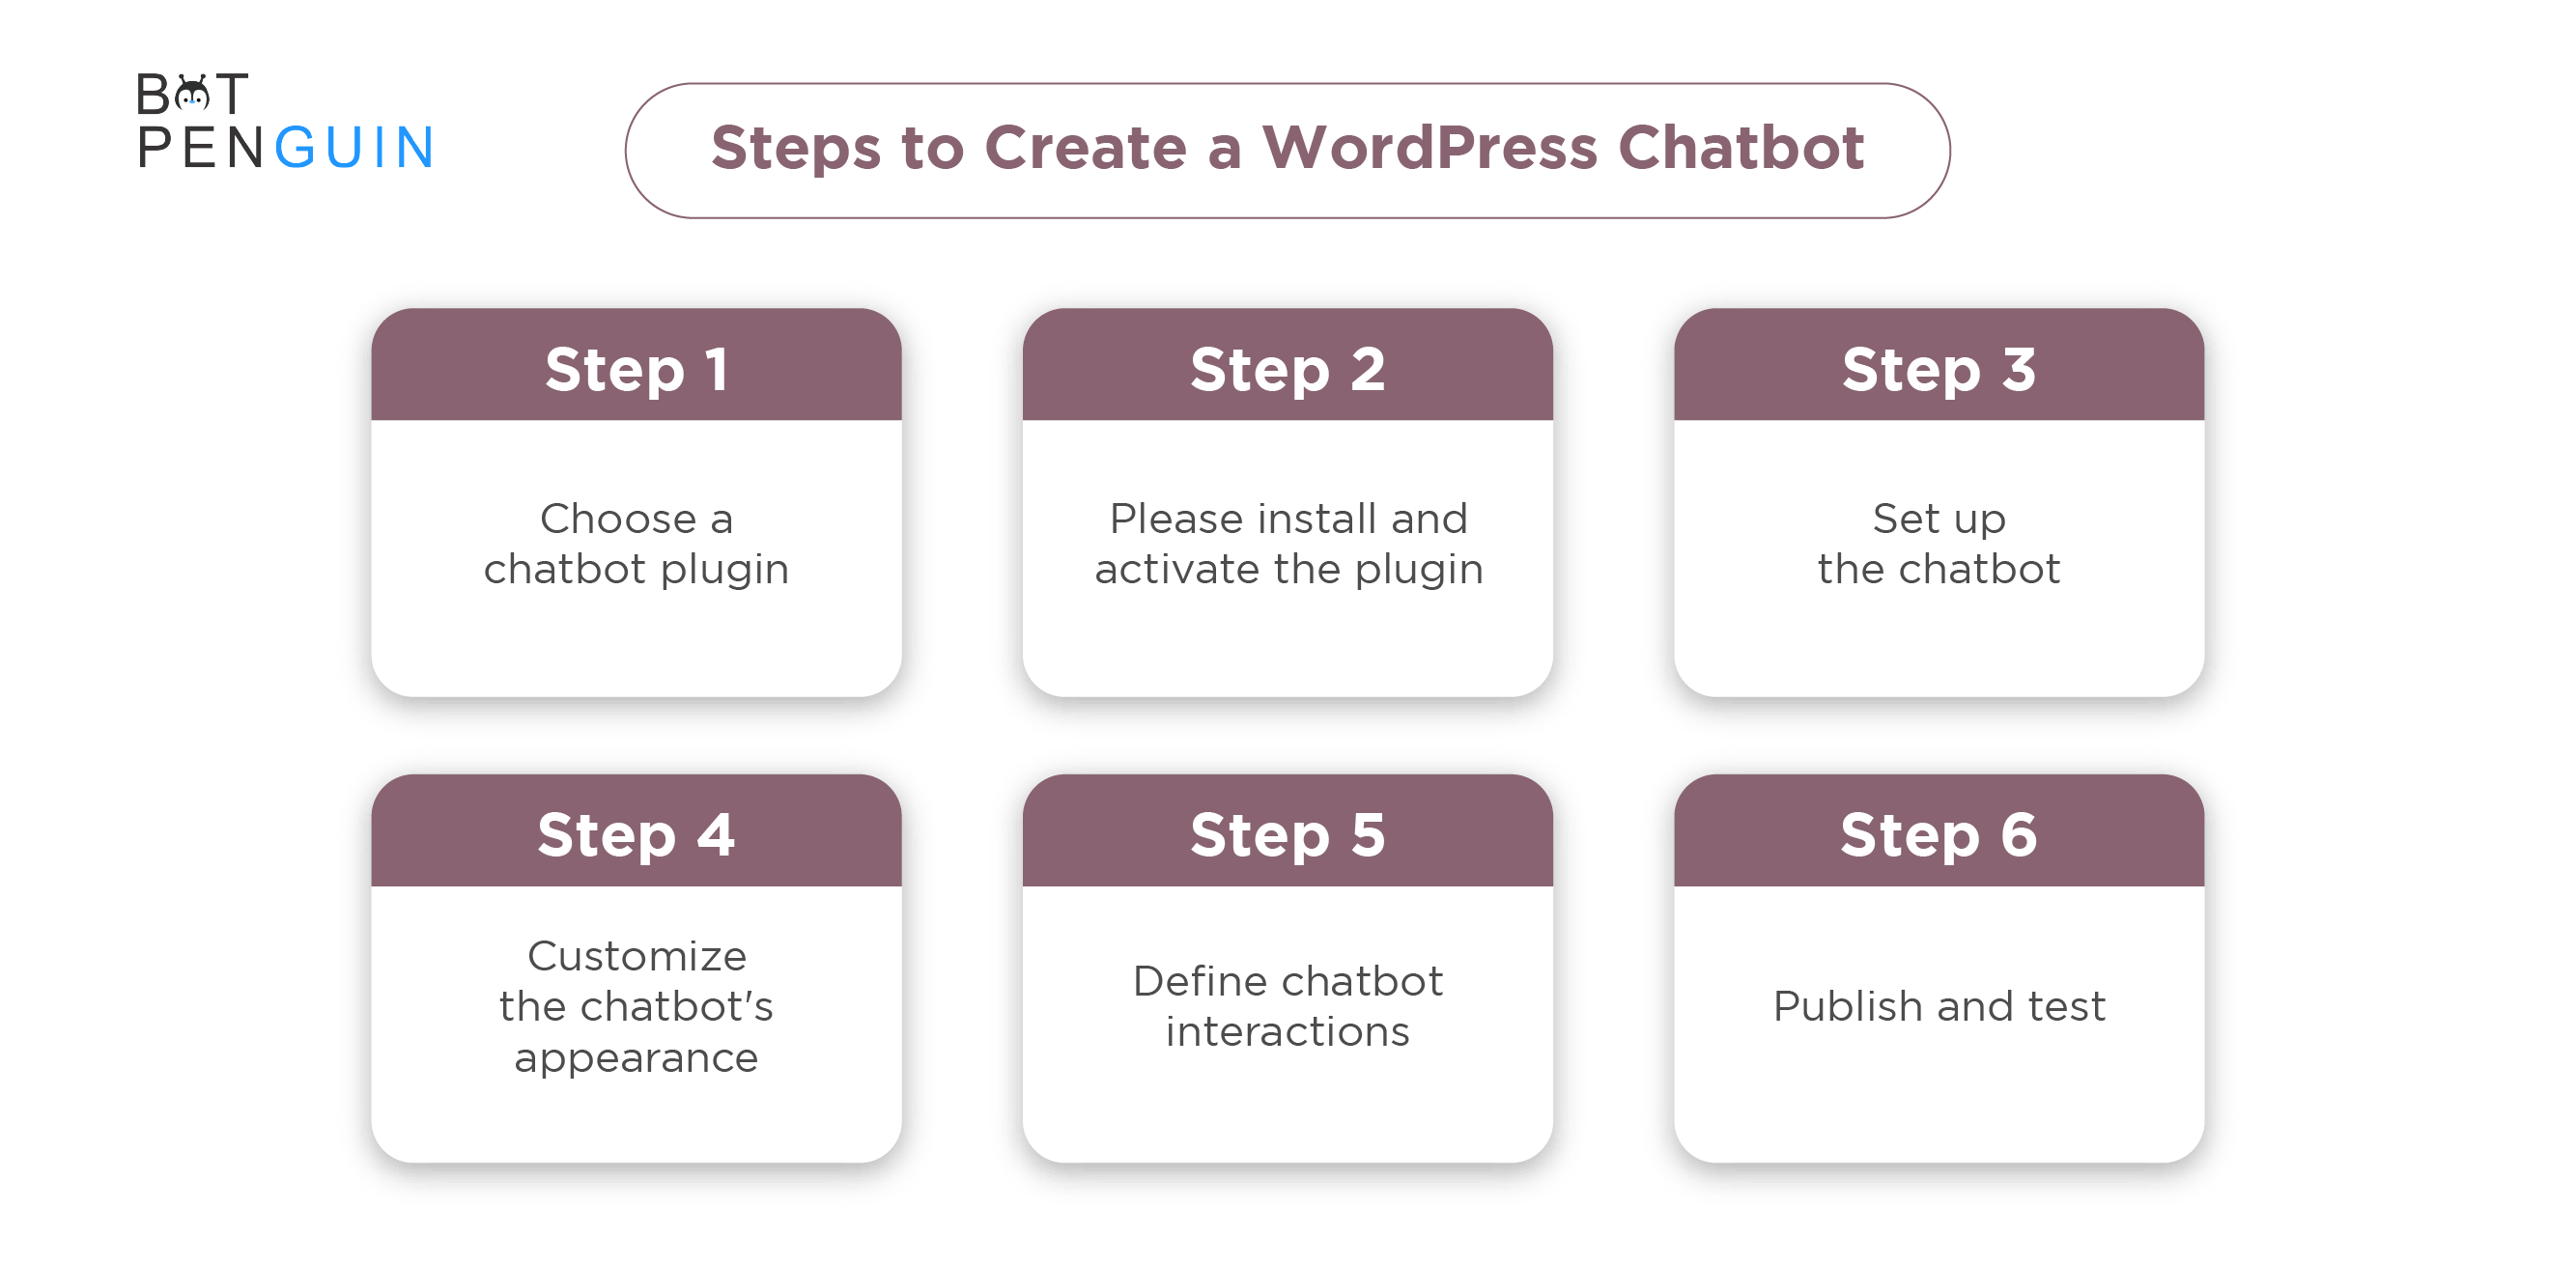 6 Easy steps to create a WordPress Chatbot in 2023